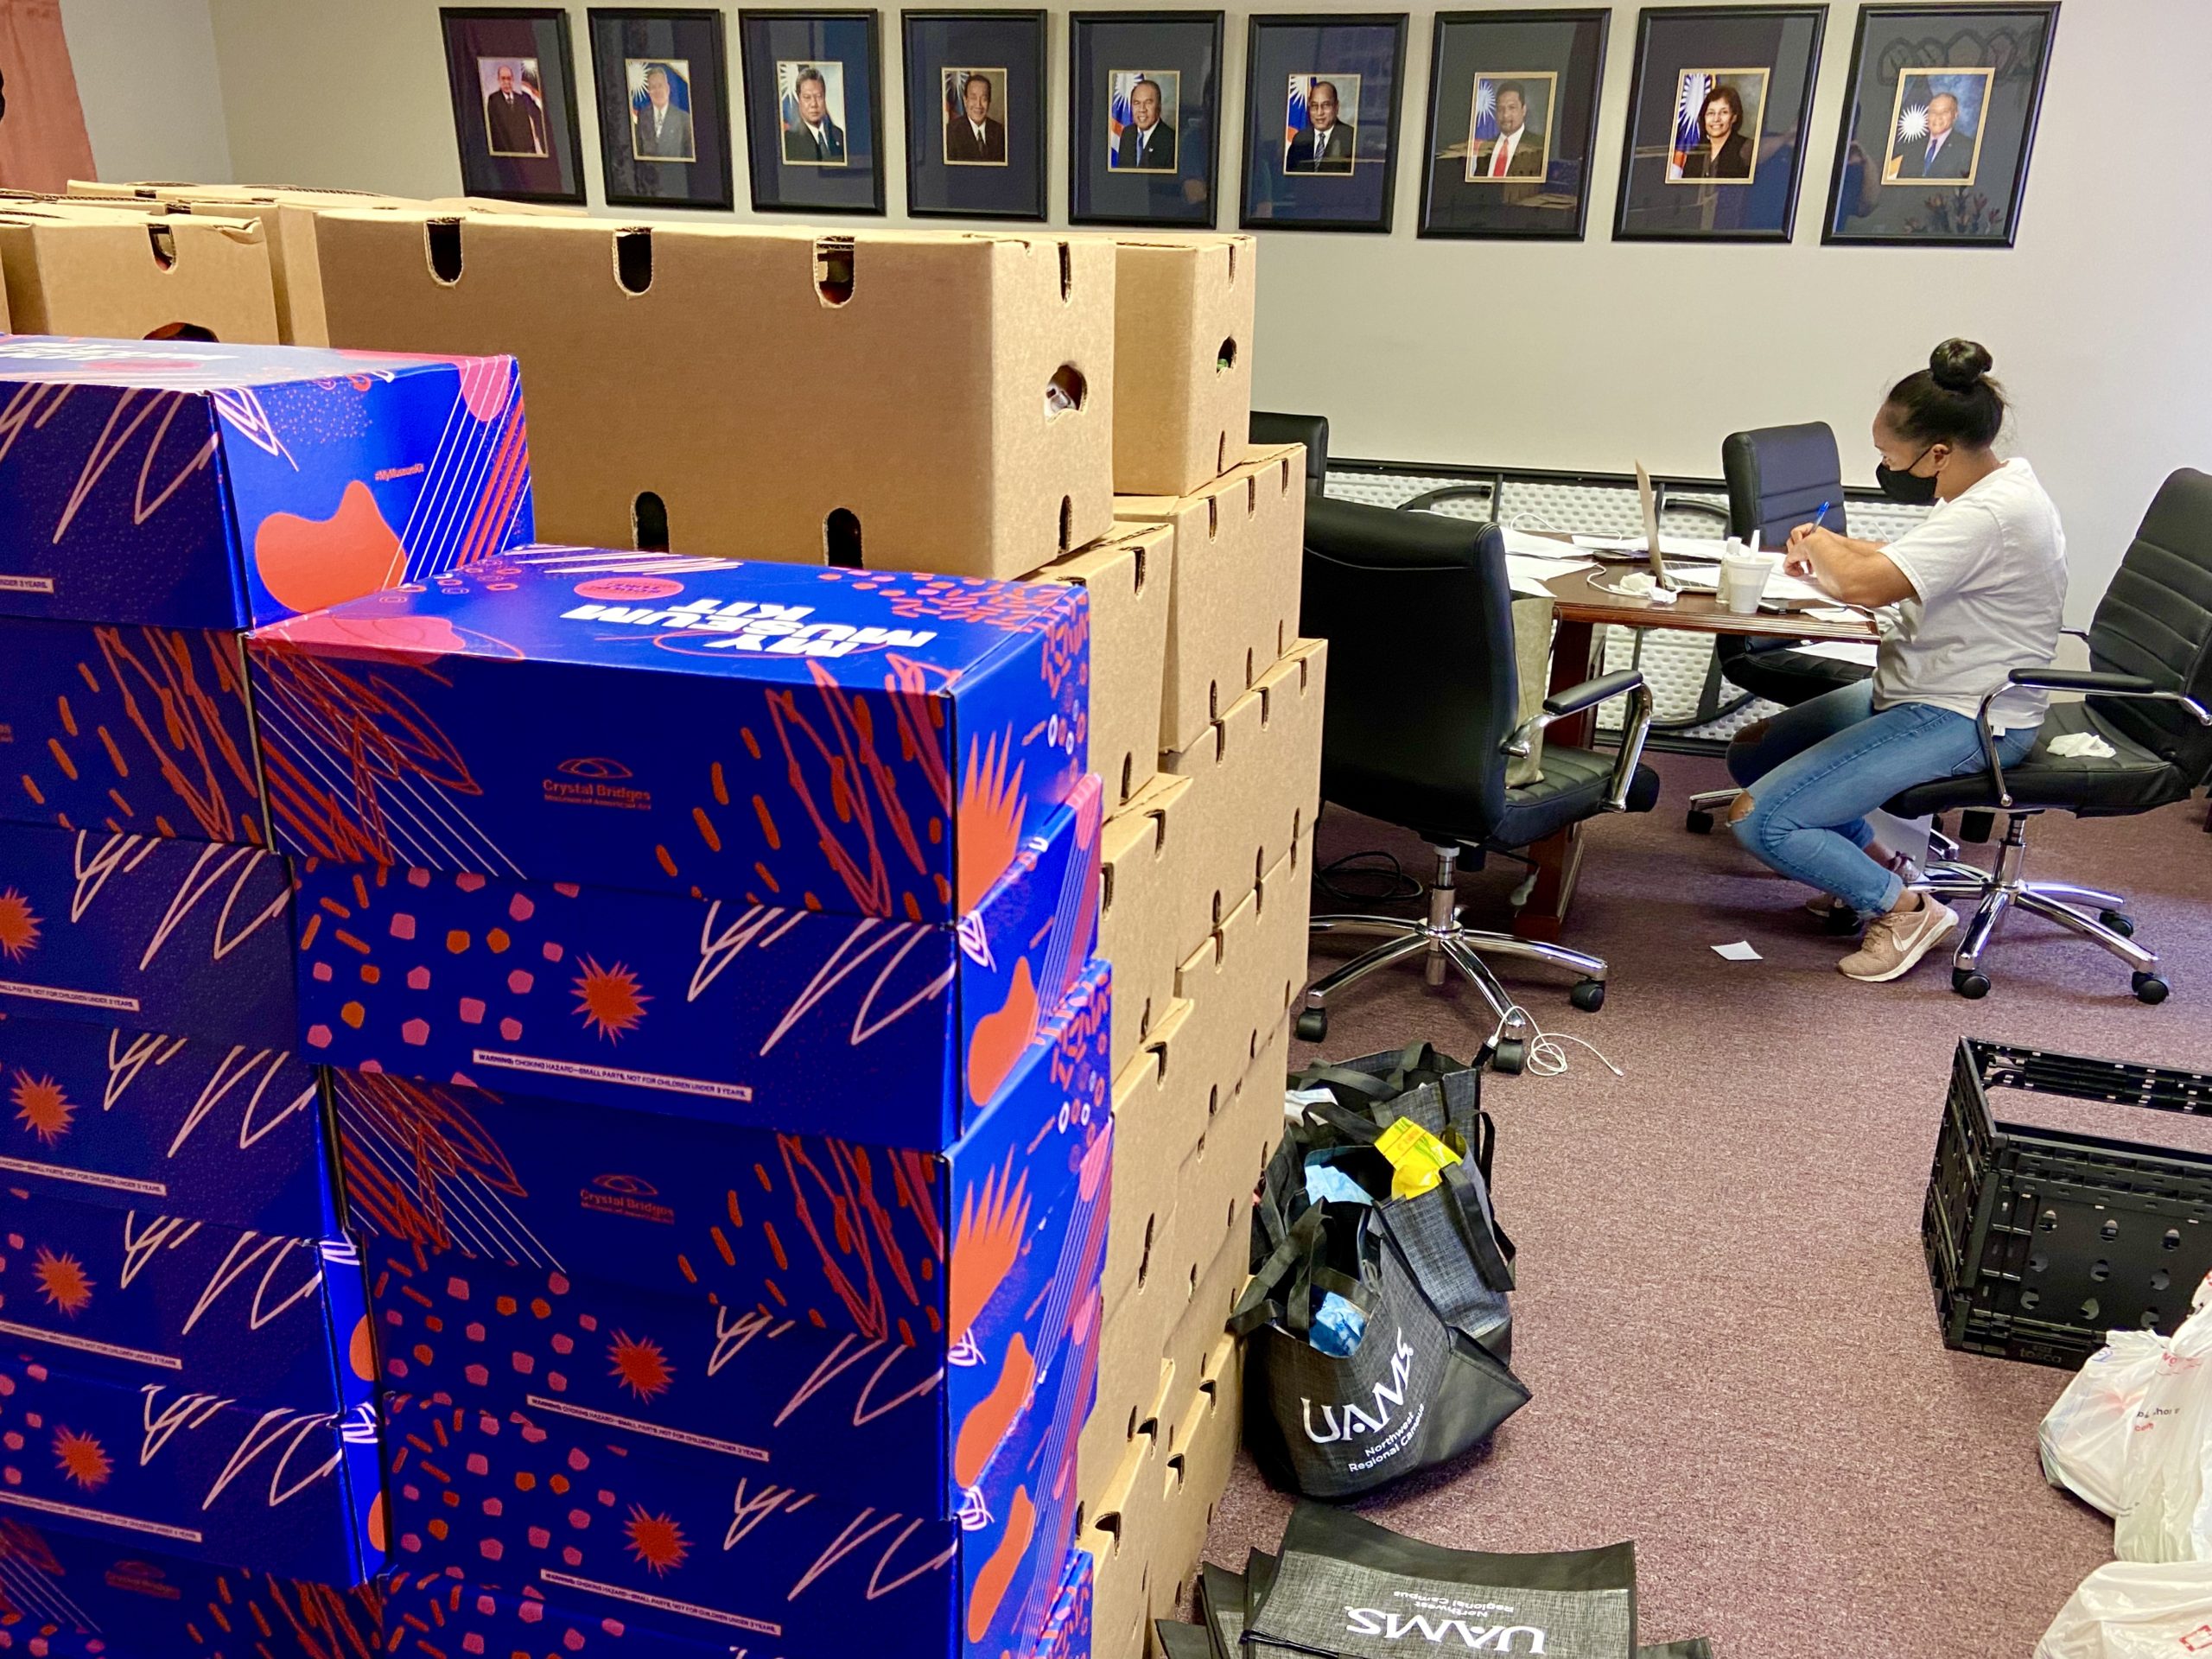 Photo of Marshallese Education Initiative workers putting together PPE and school supplies in a stack of boxes in an office